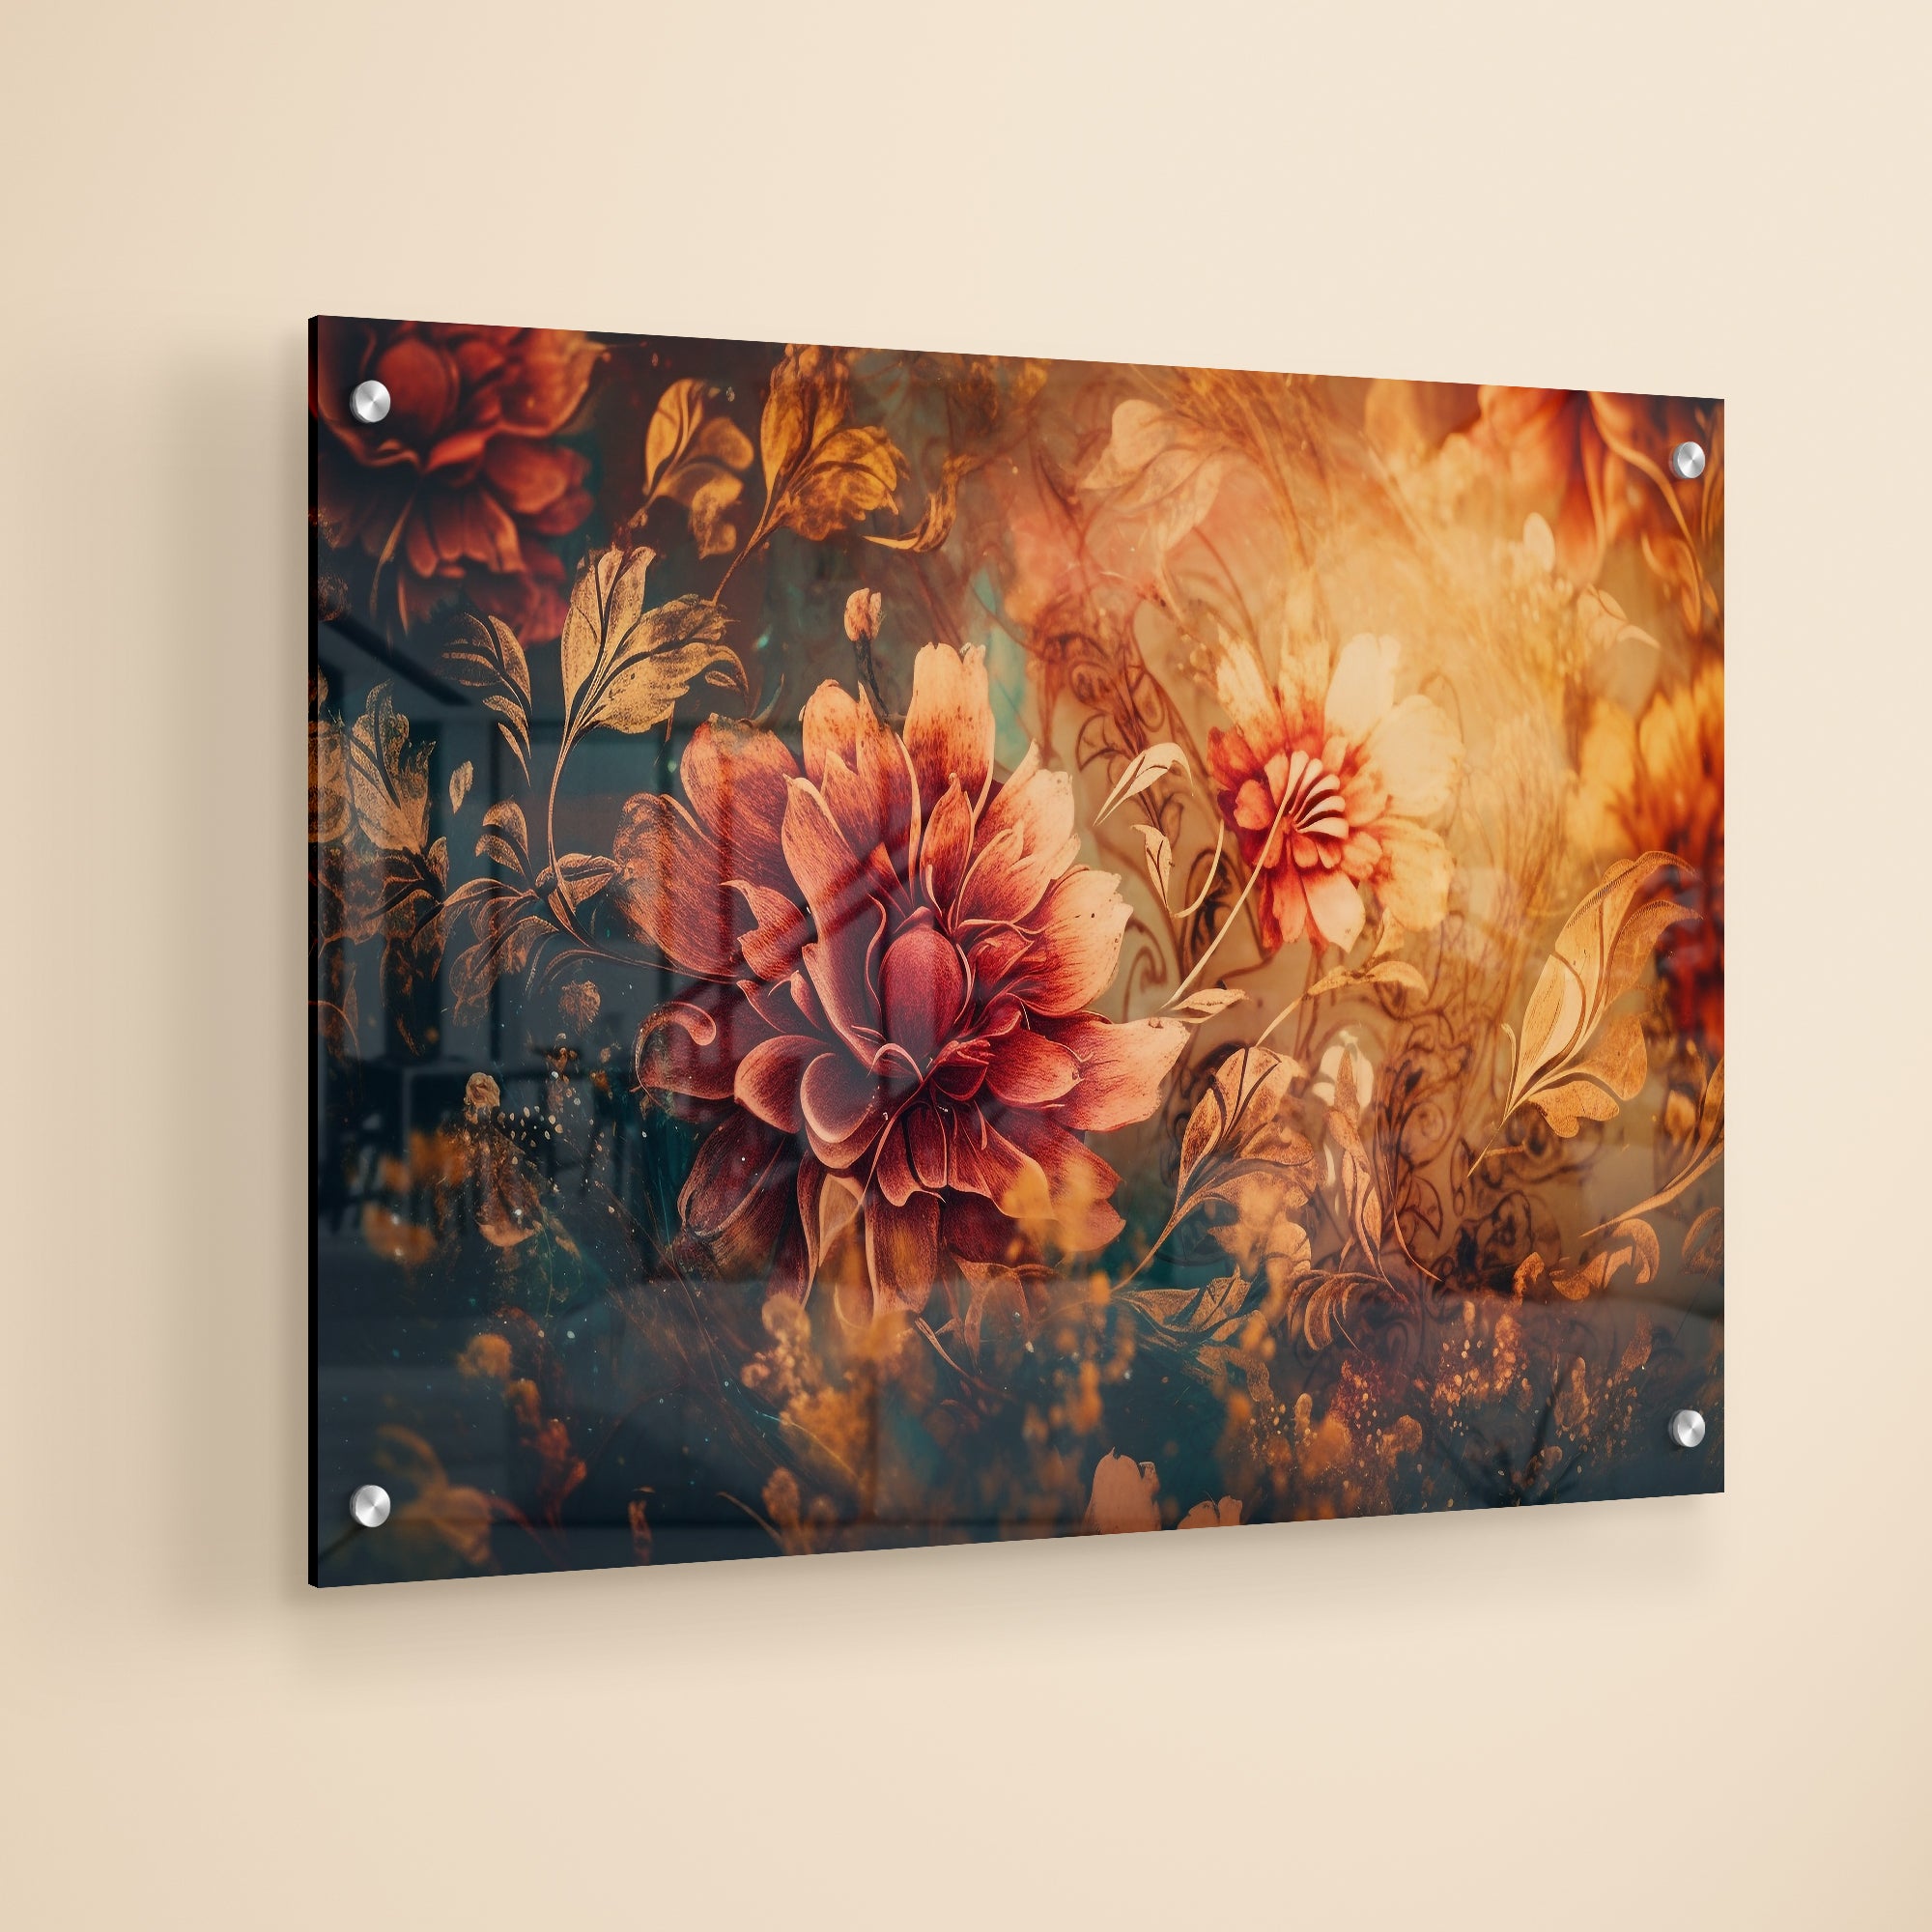 Floral Patterns Decorate Acrylic Painting